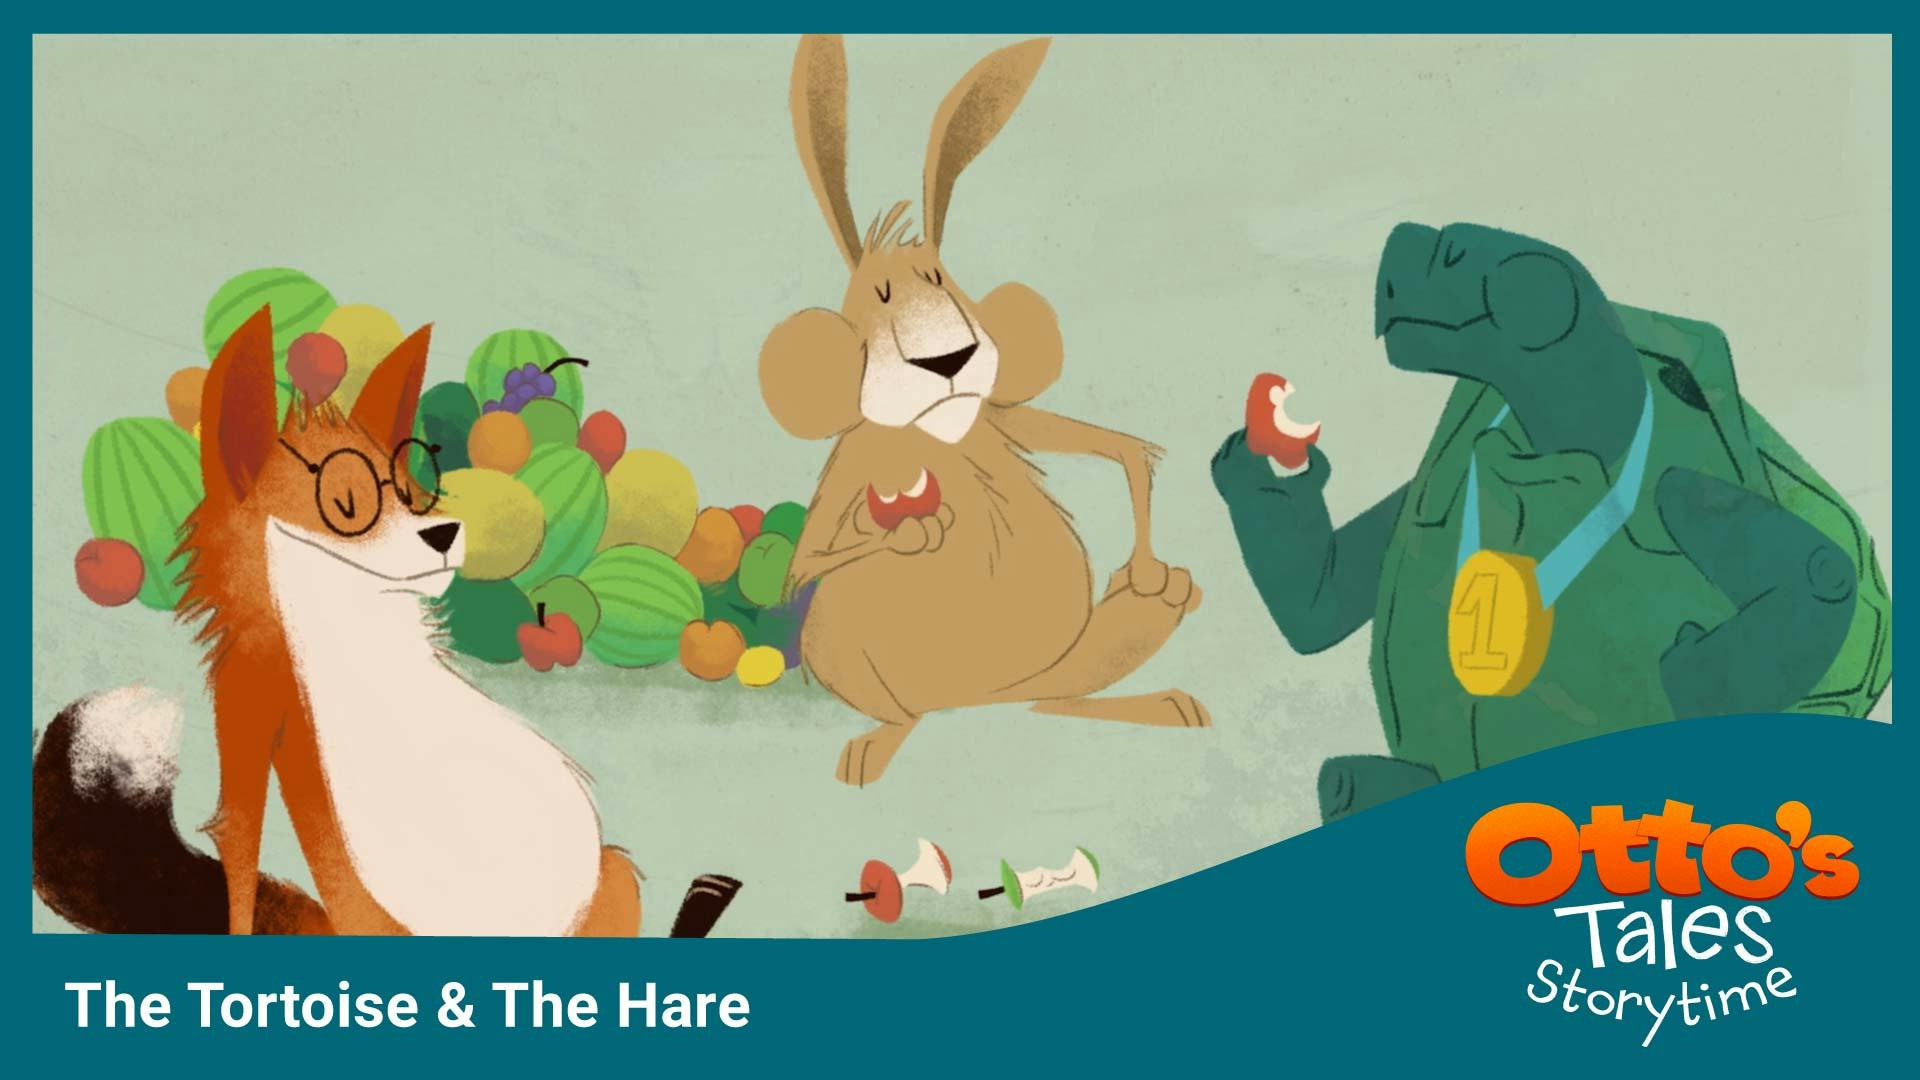 The Tortoise & The Hare